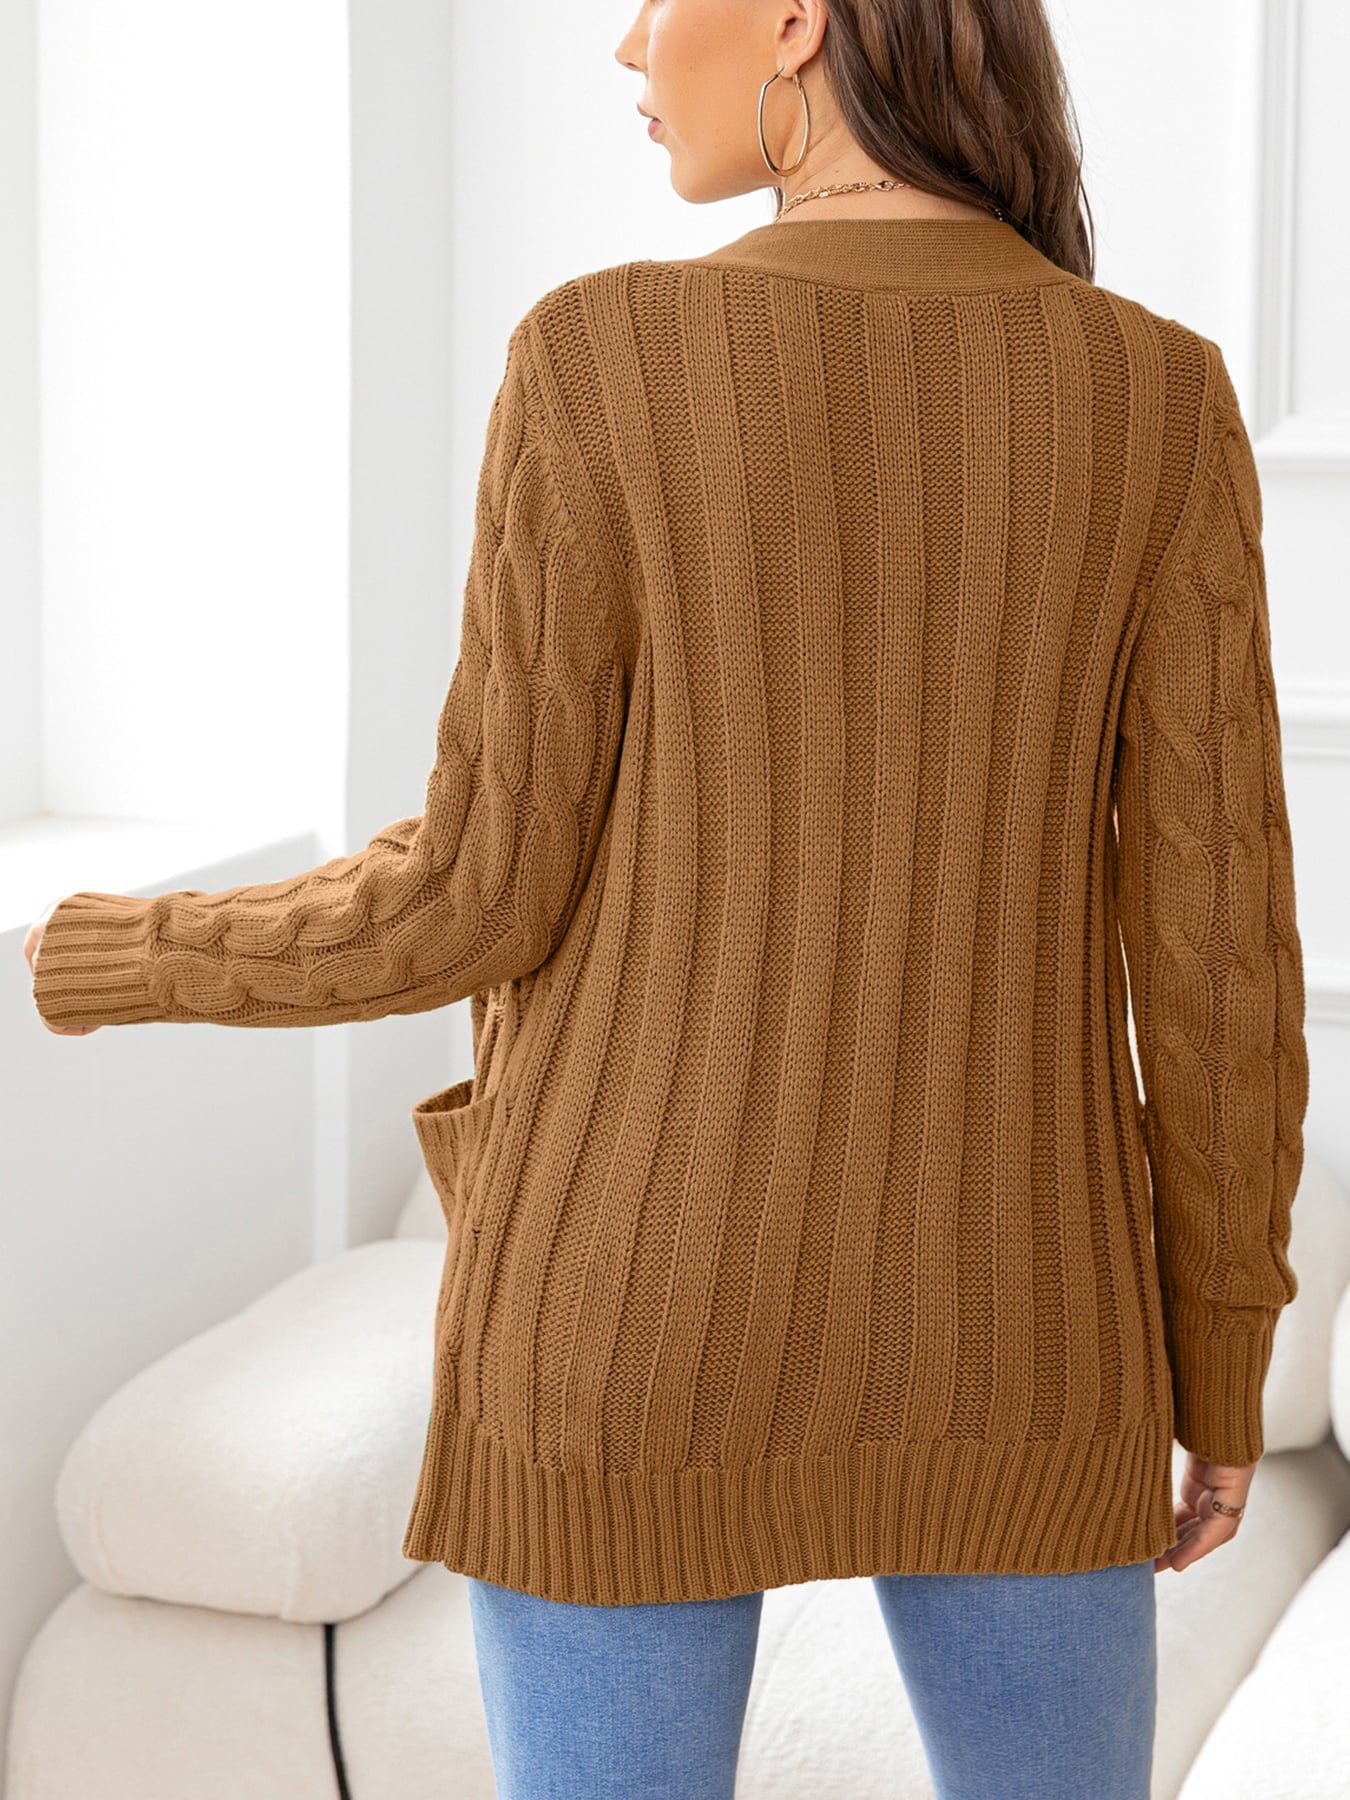 Button Down Cable-Knit Cardigan - Women’s Clothing & Accessories - Shirts & Tops - 2 - 2024